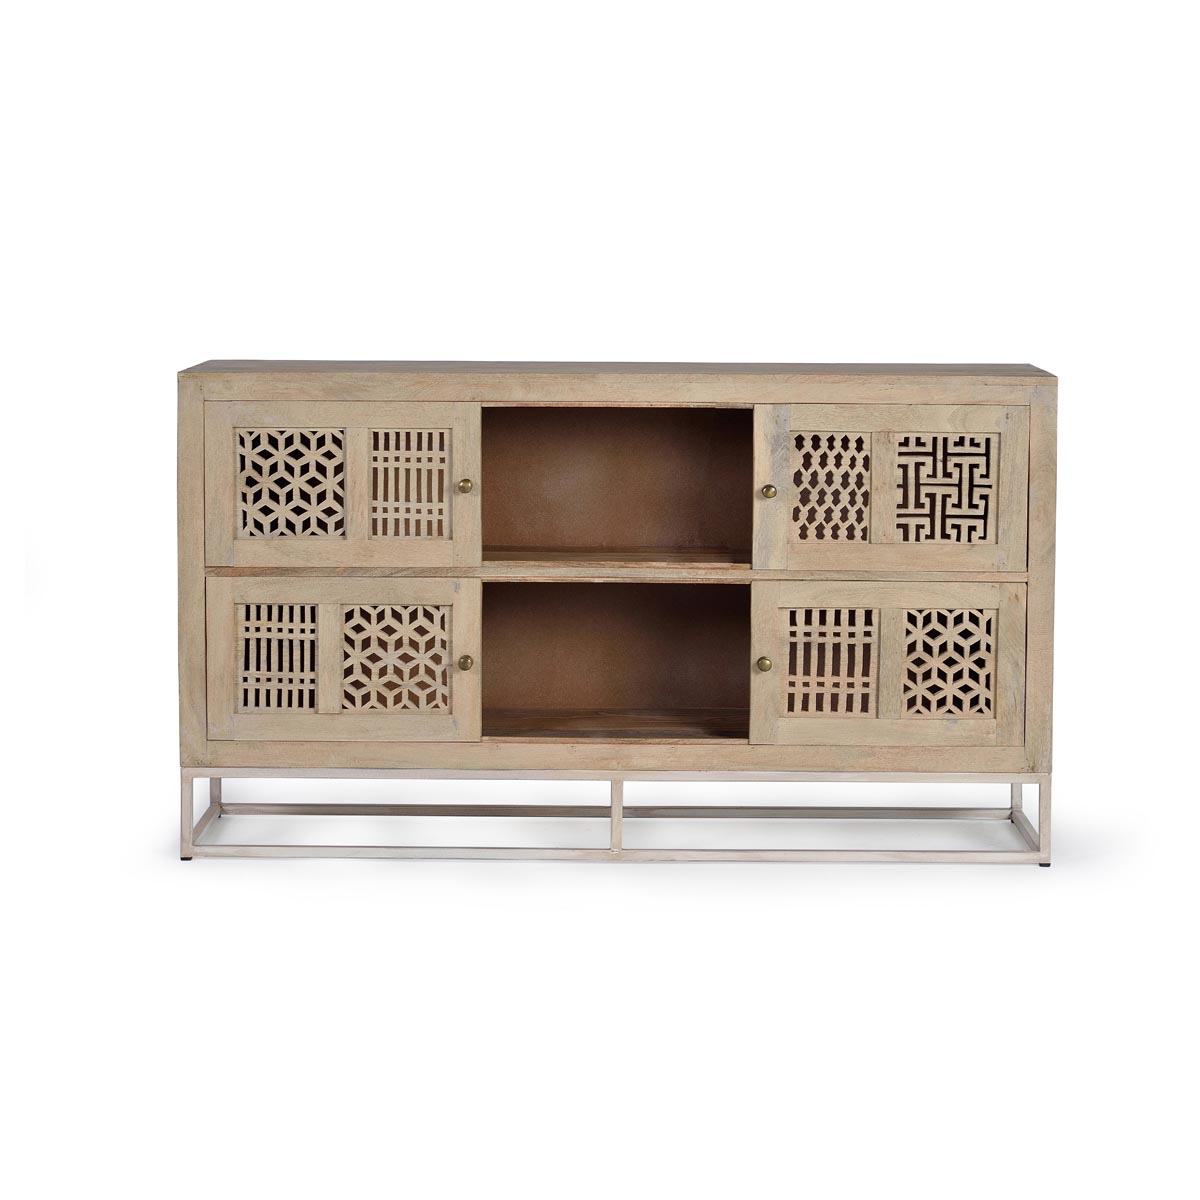 Mango Wood and Iron Sideboard by Giner & Colomer